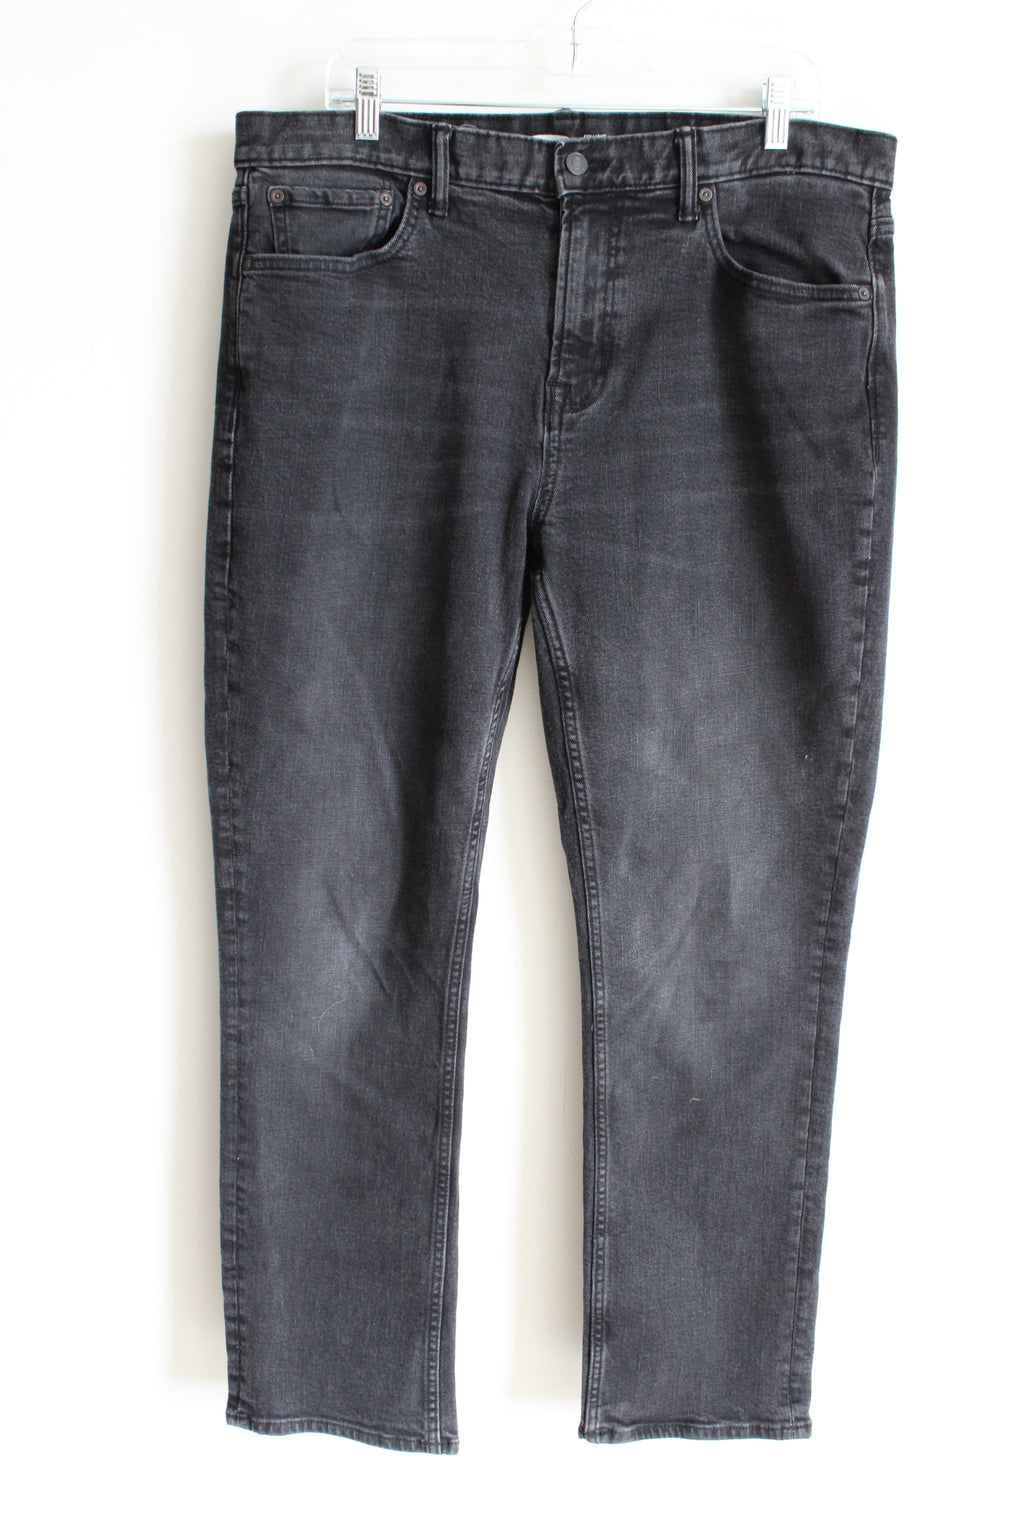 Old Navy Straight Fit Black Denim Built-In Tough Jeans | 36X32